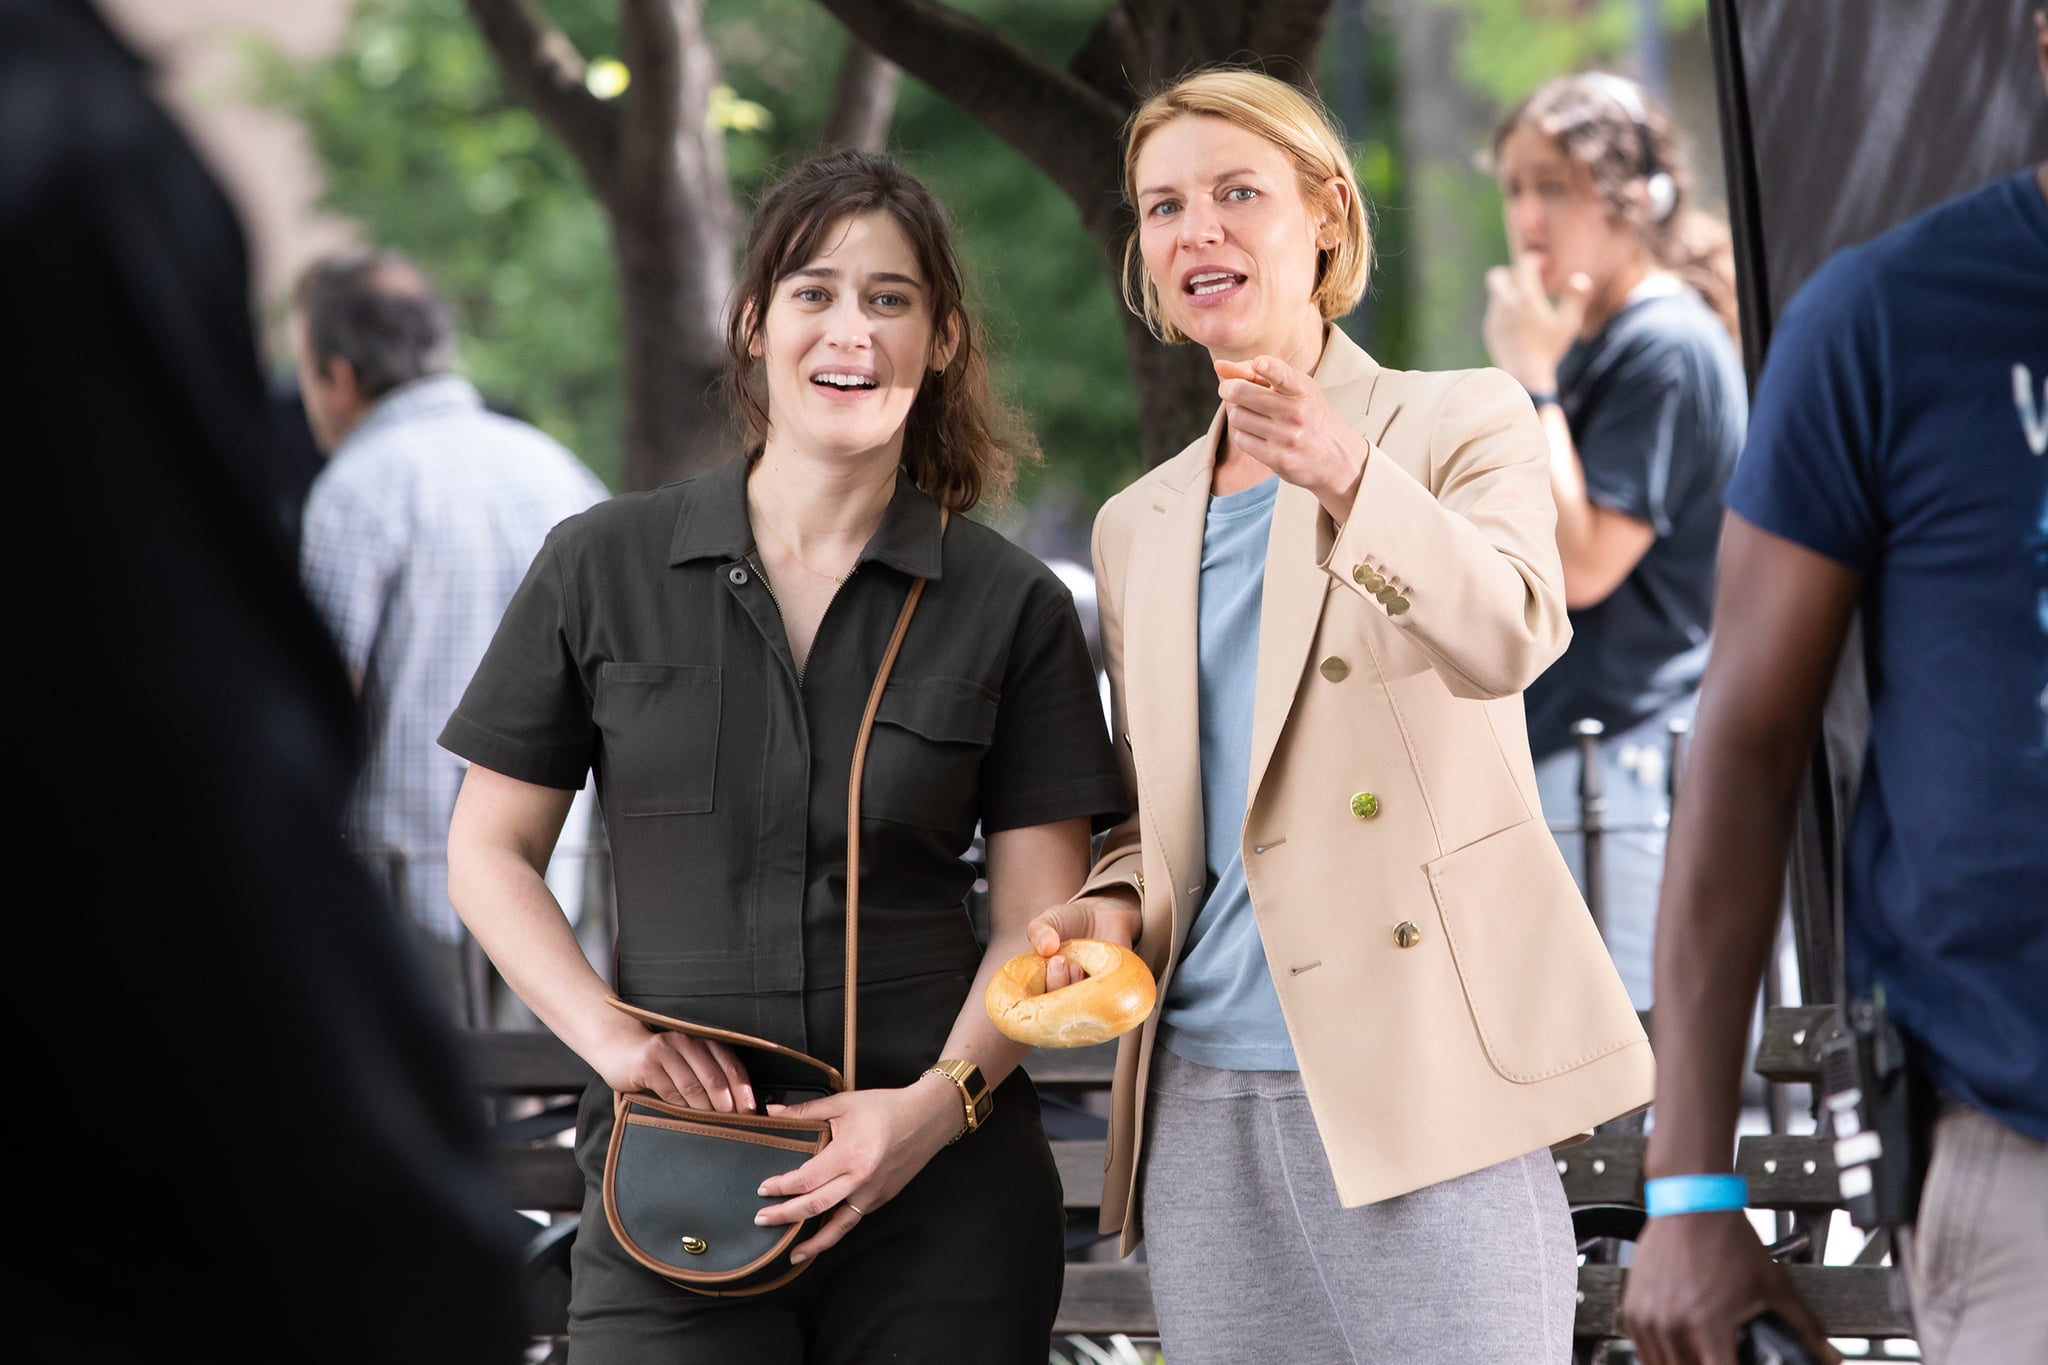 NEW YORK NY - JUNE 7: Lizzy Caplan and Claire Danes are seen on the set of 